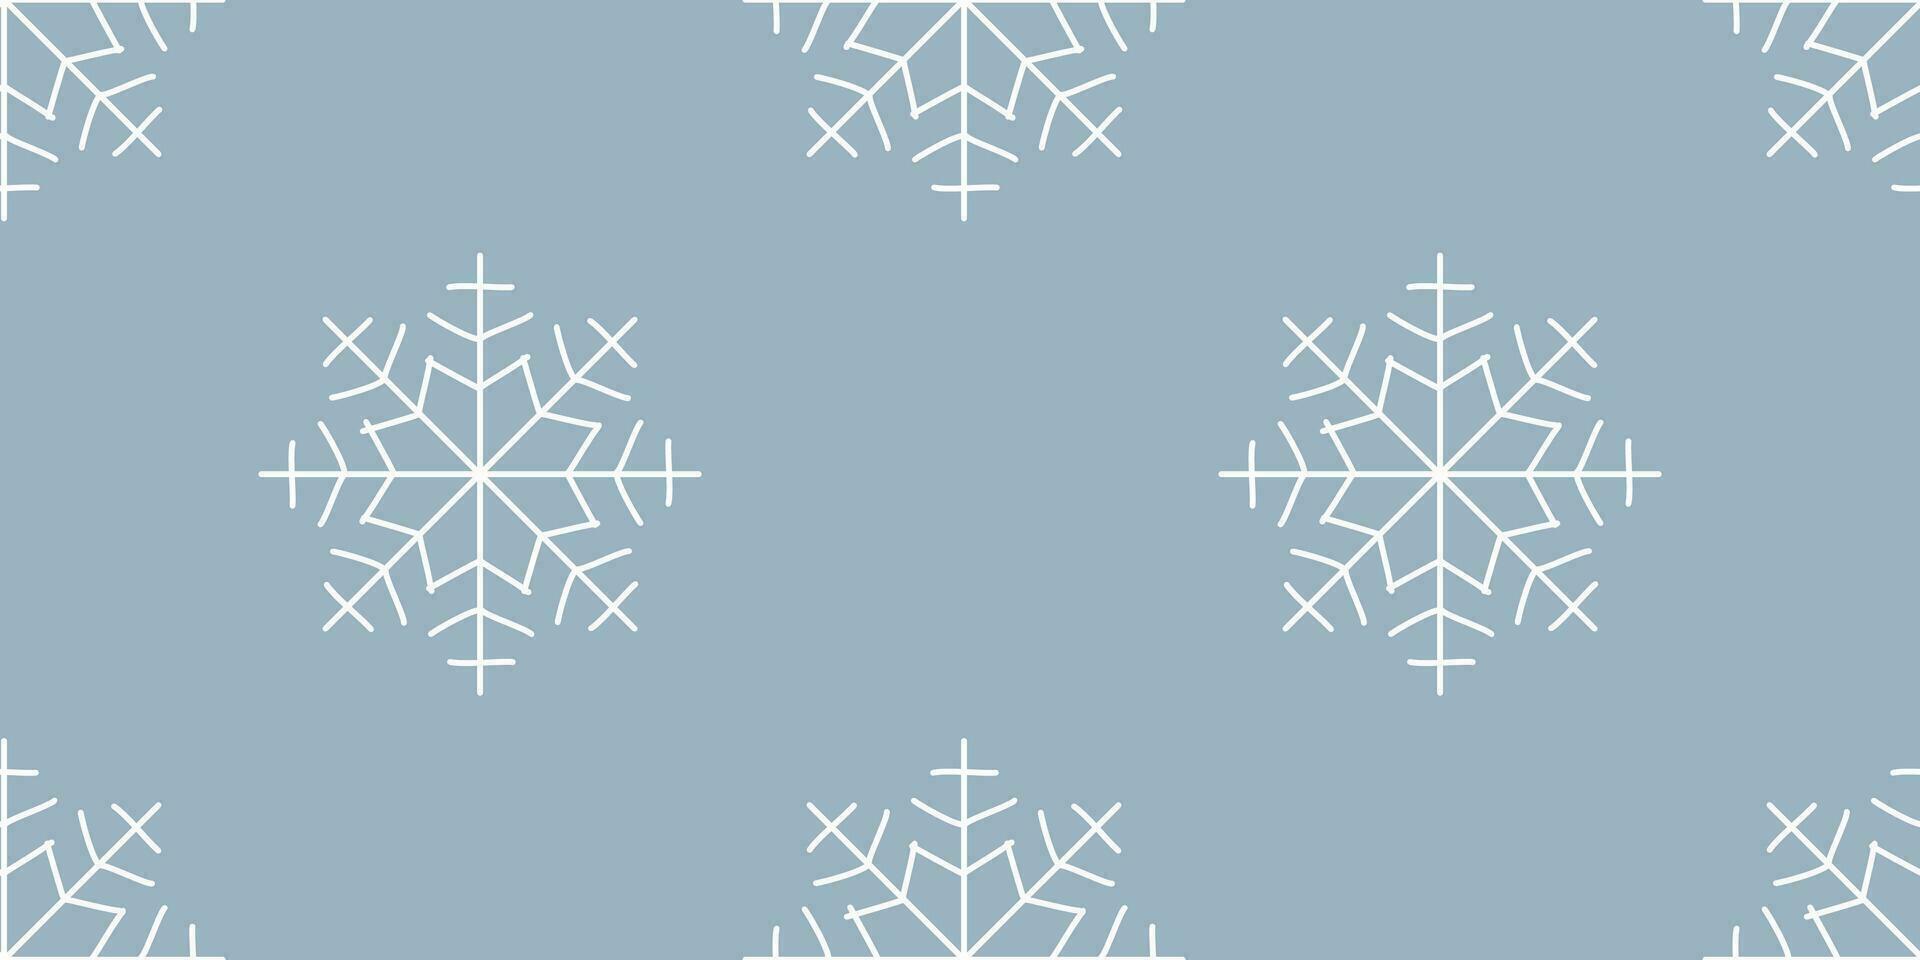 Christmas Seamless pattern with snowflakes. Winter Flat vector illustration for Holiday decoration, Wrapping paper template, Seasonal banner. Design art Endless background with snowfall on blue.